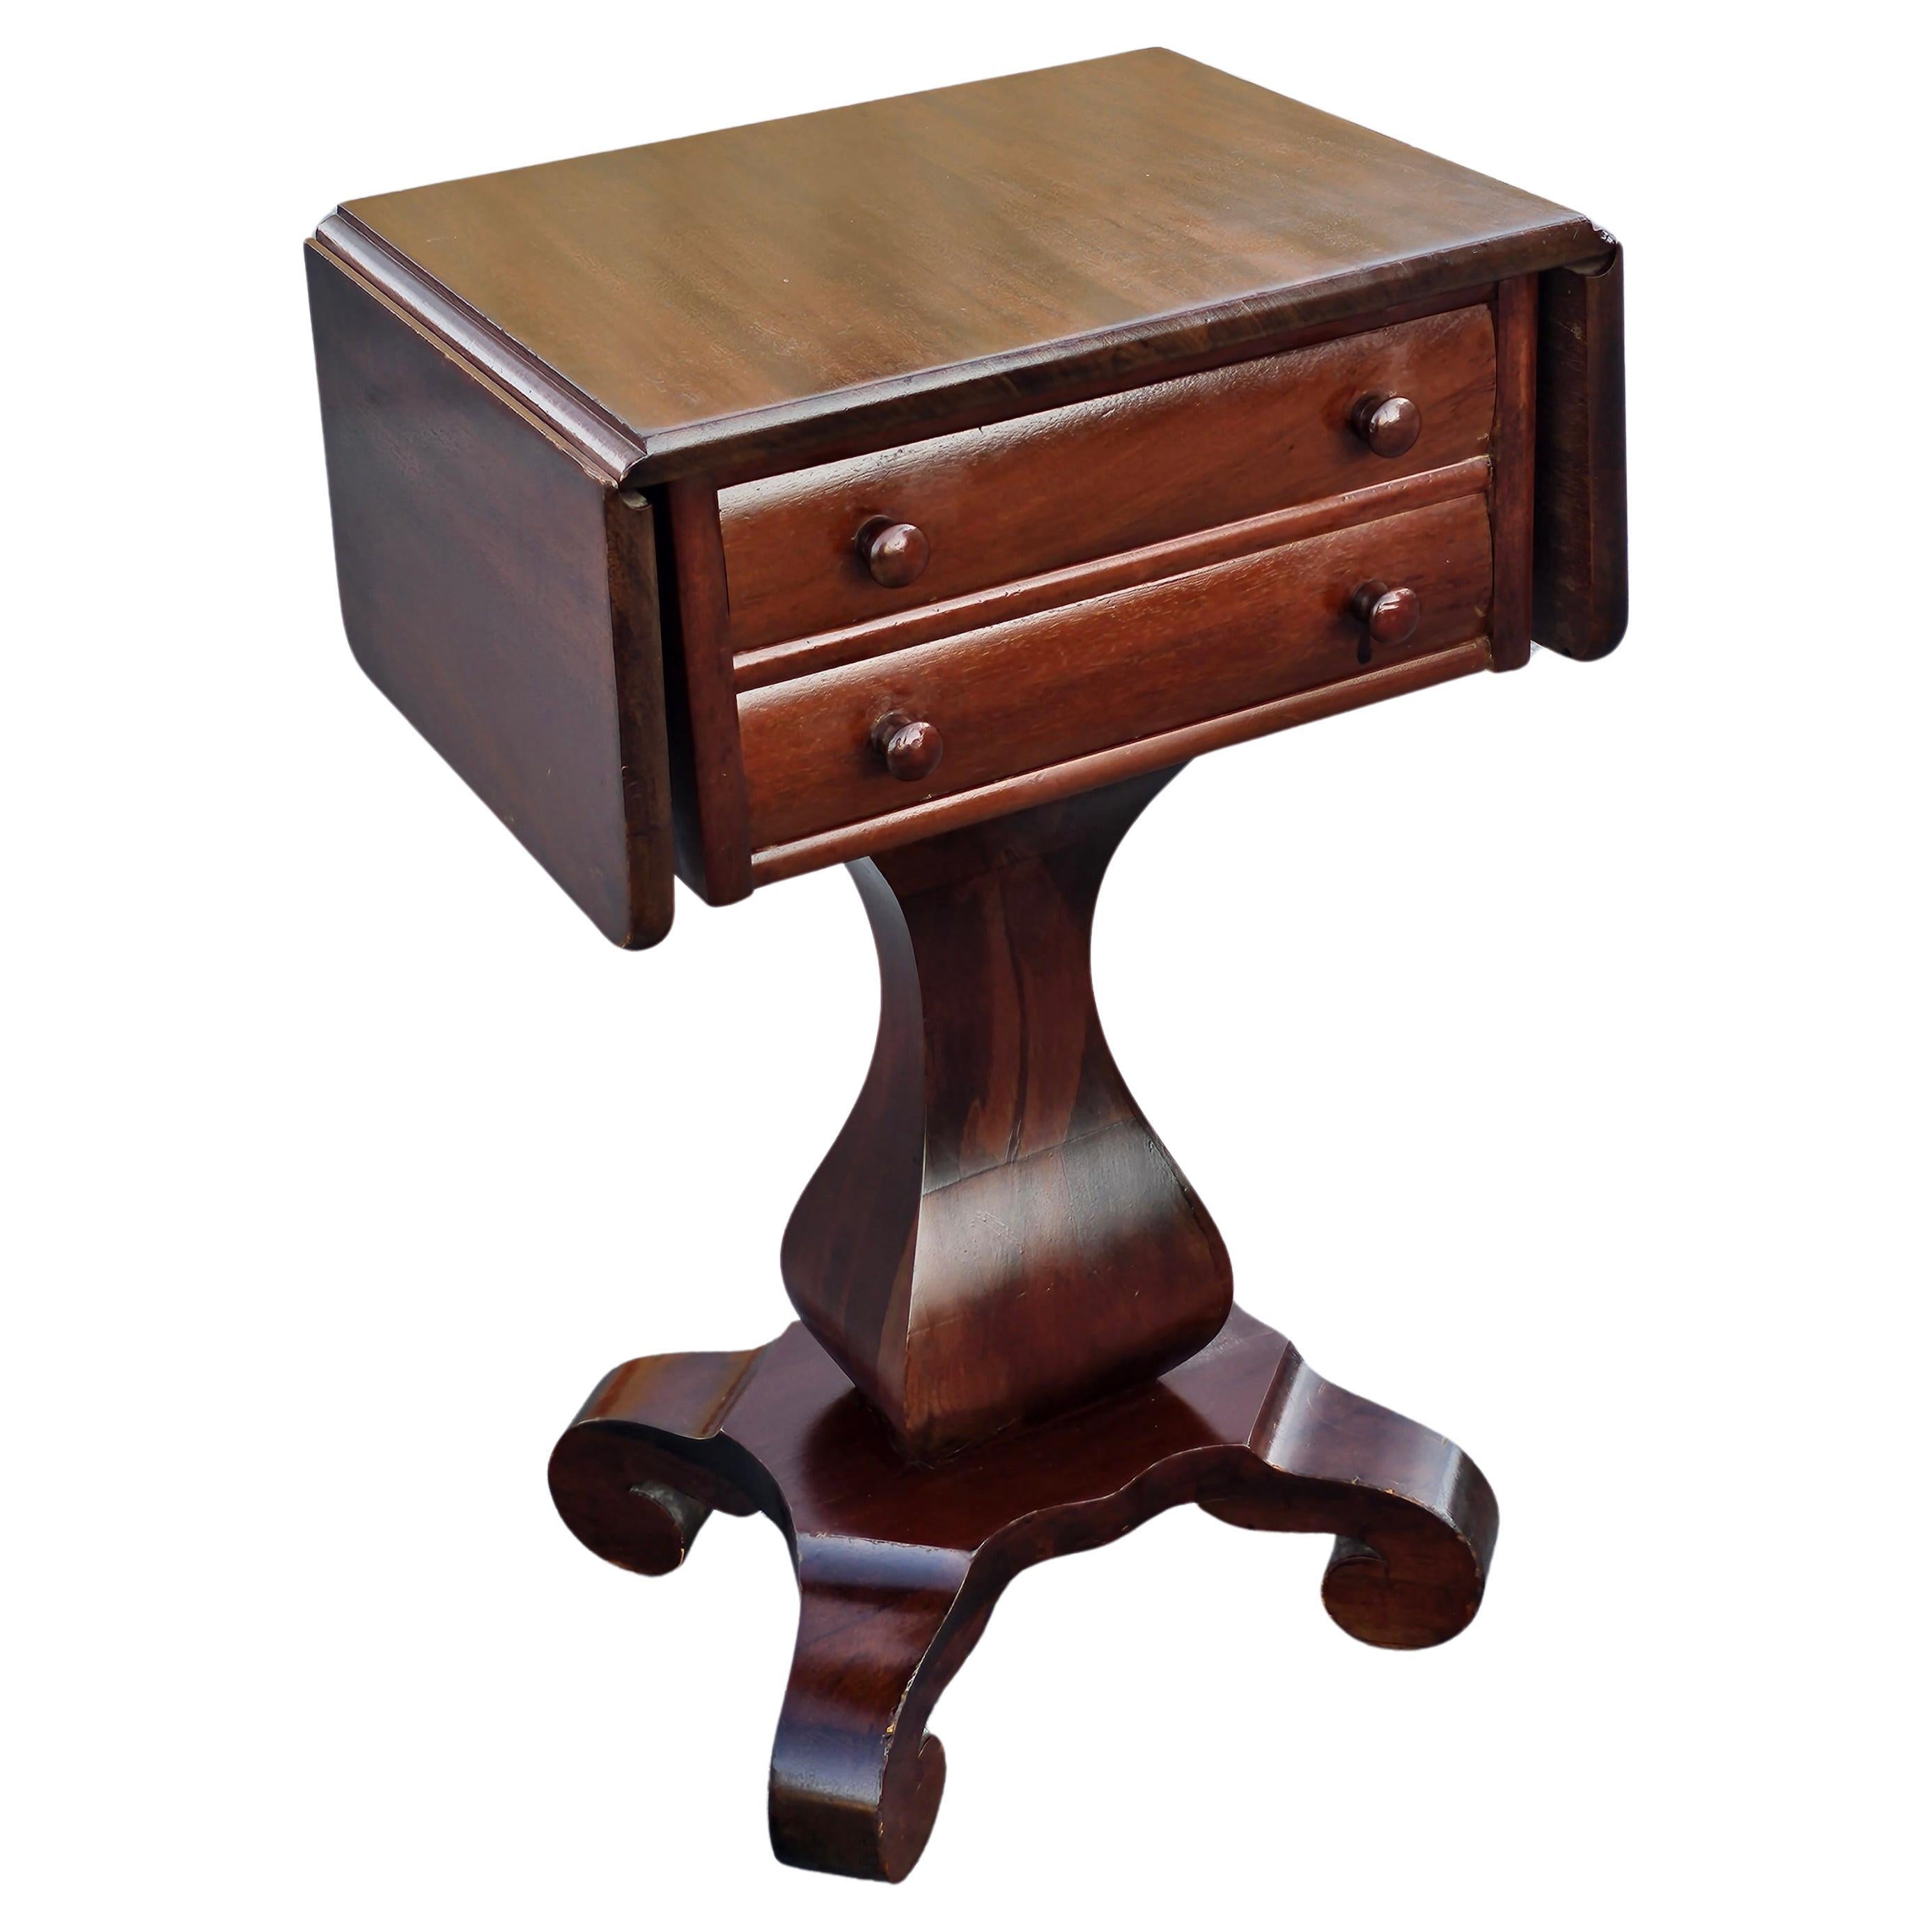 Early 20th Century American Empire Mahogany Drop Leaf Side Table By Imperial  For Sale